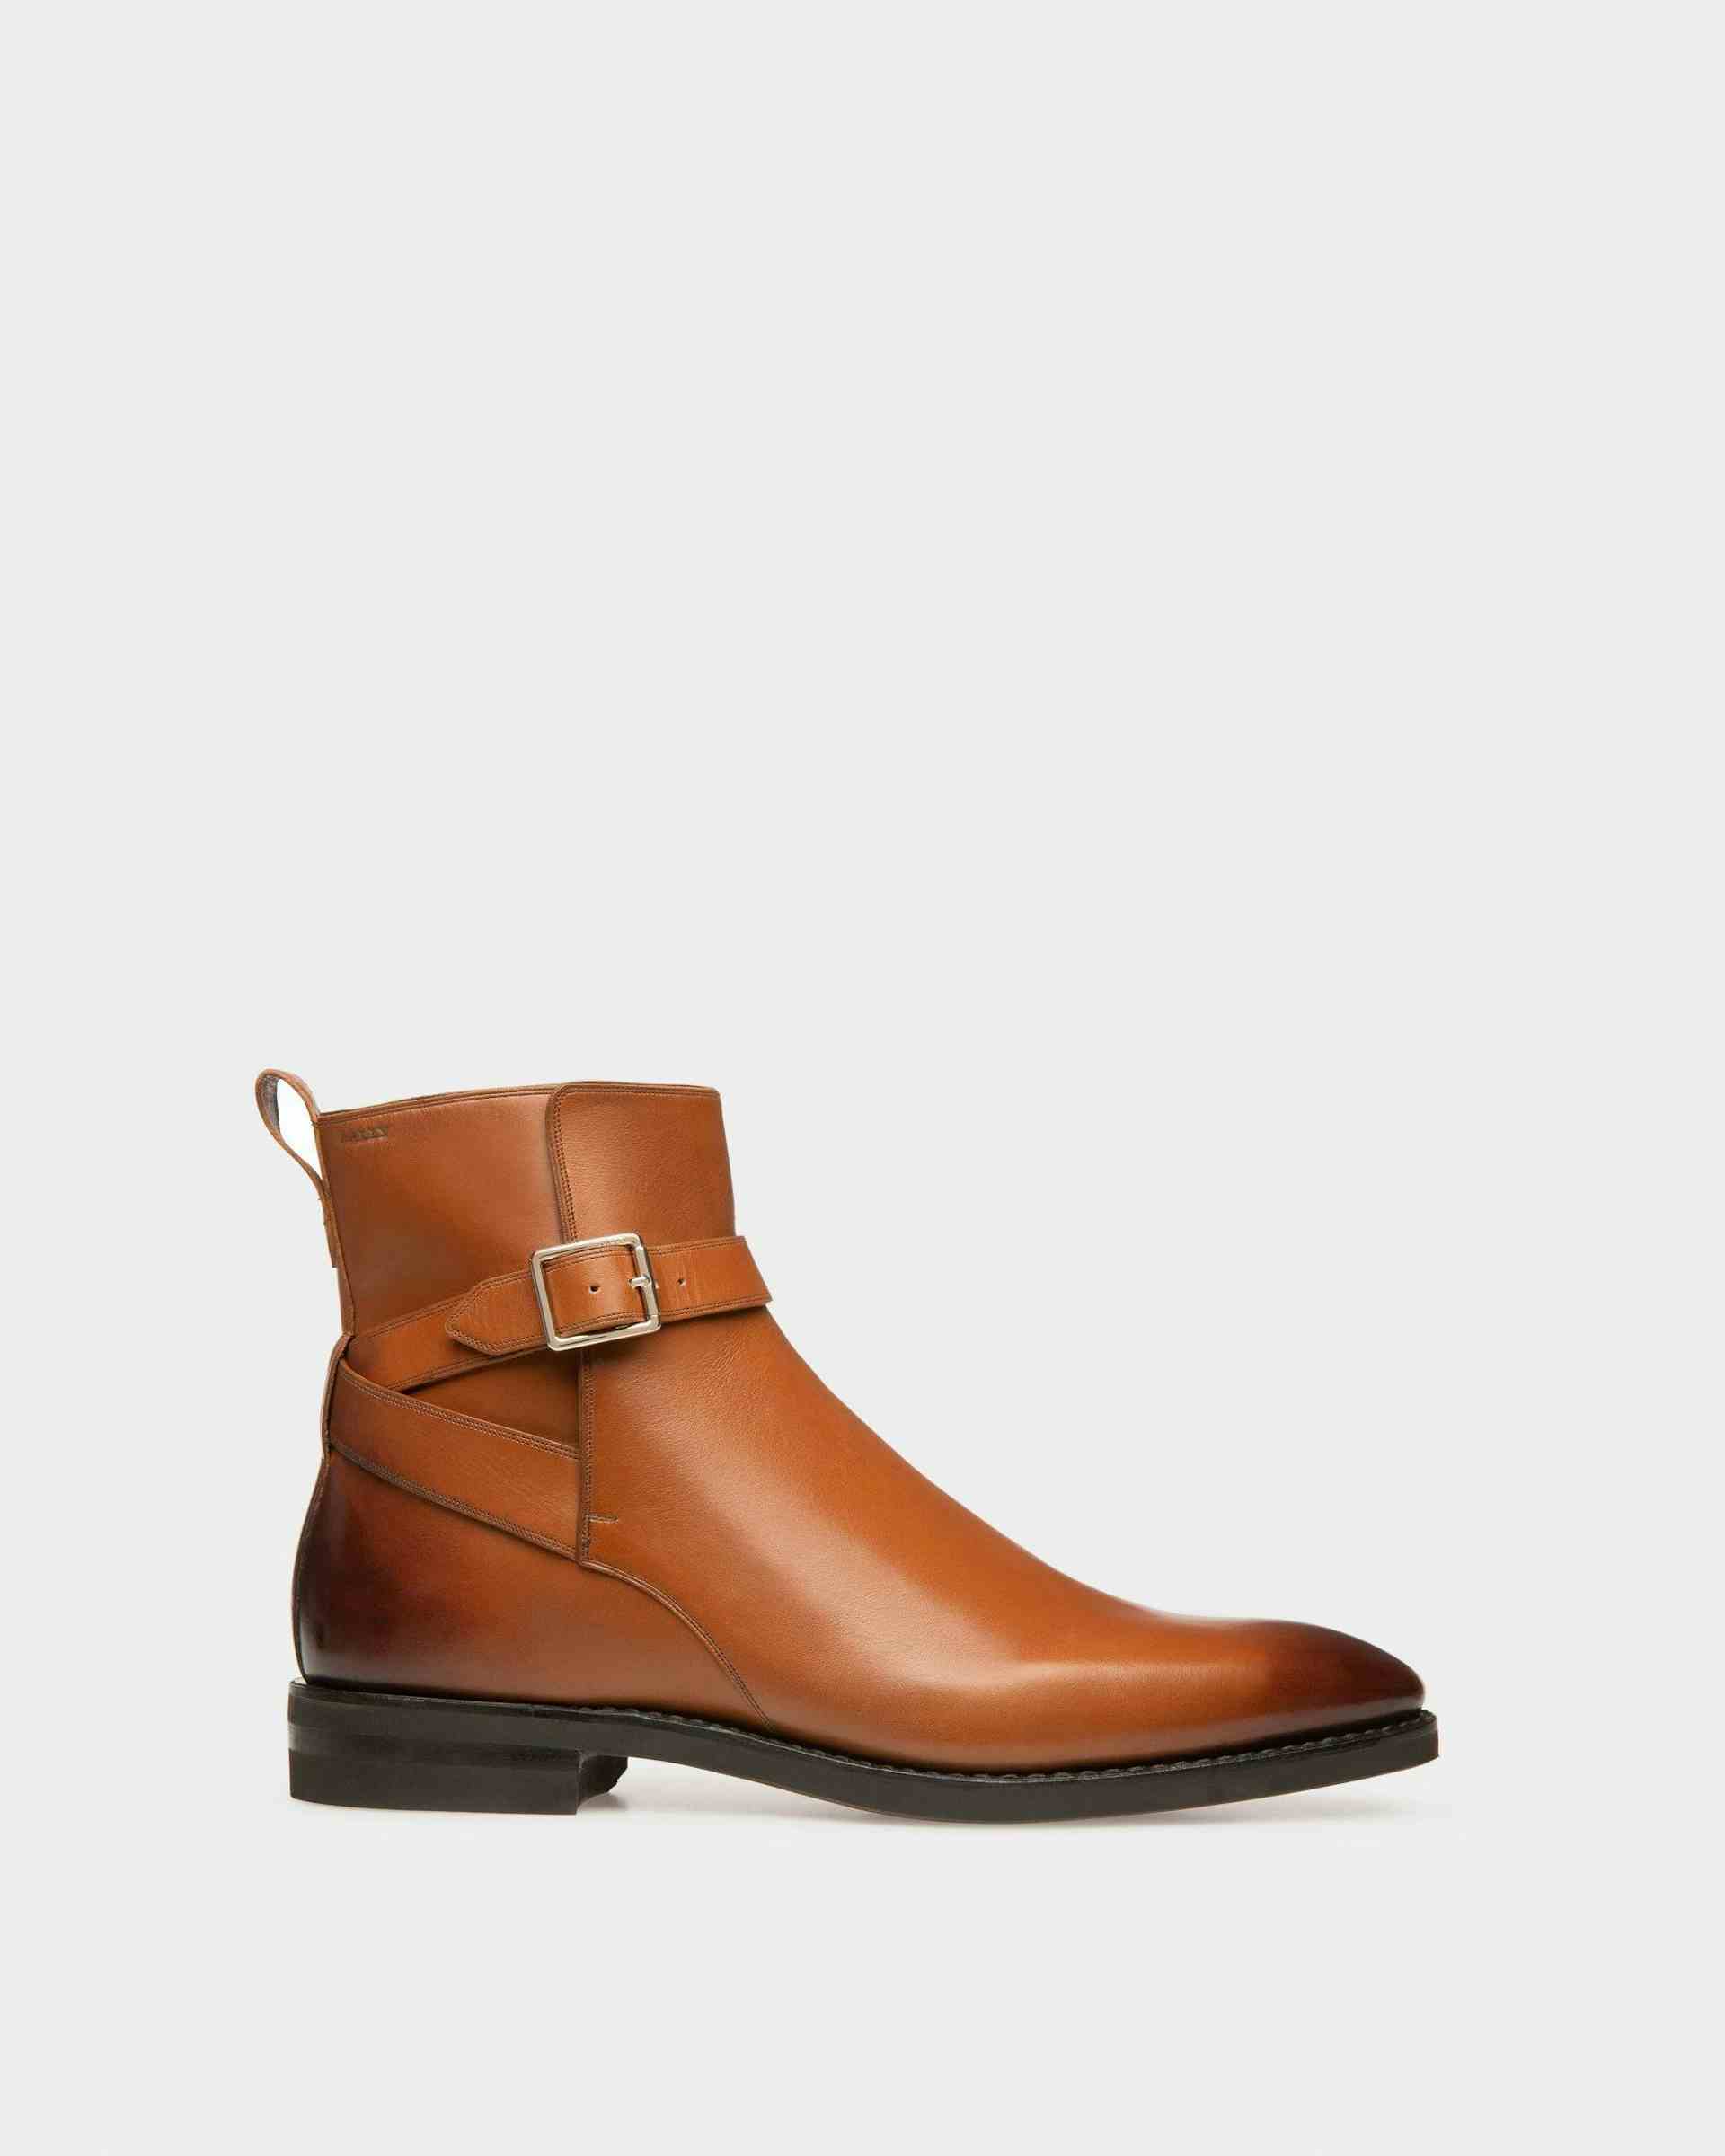 Scaviel Leather Boots In Brown - Men's - Bally